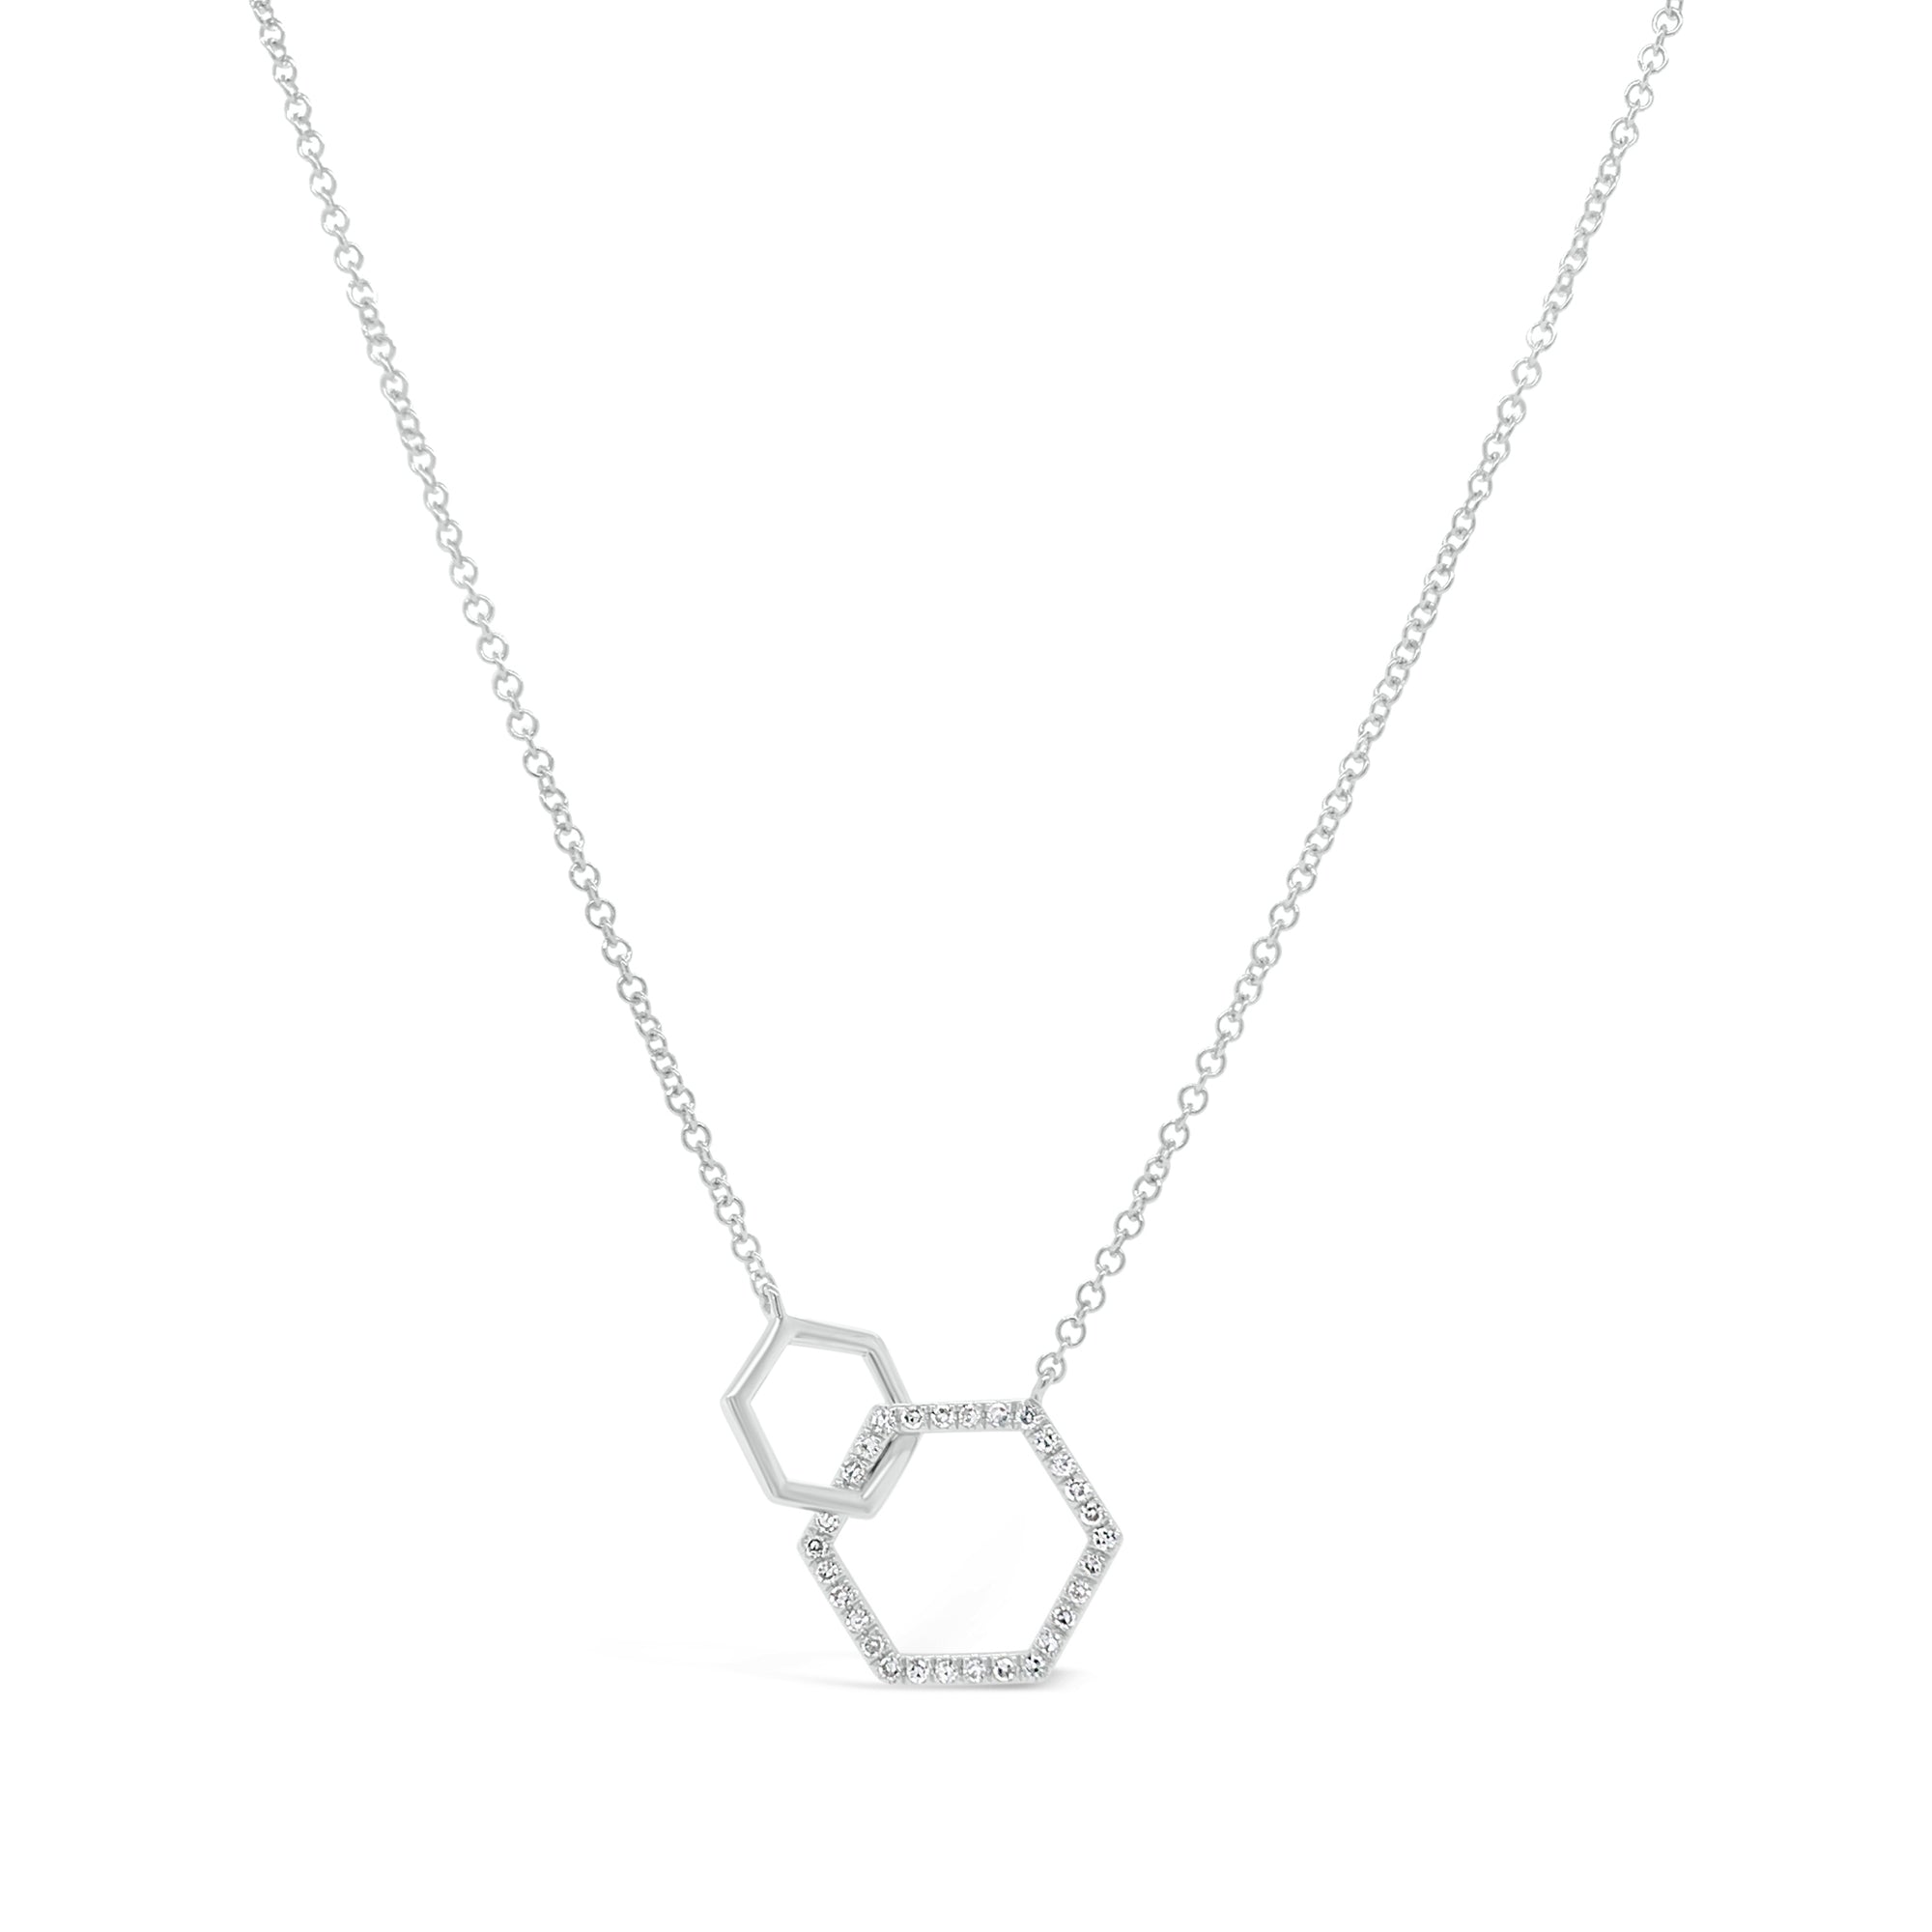 Solid 14K white gold weighting 1.76 grams with 30 round diamonds totaling 0.10 carats Double Hexagon Pendant Necklace | Nuha Jewelers